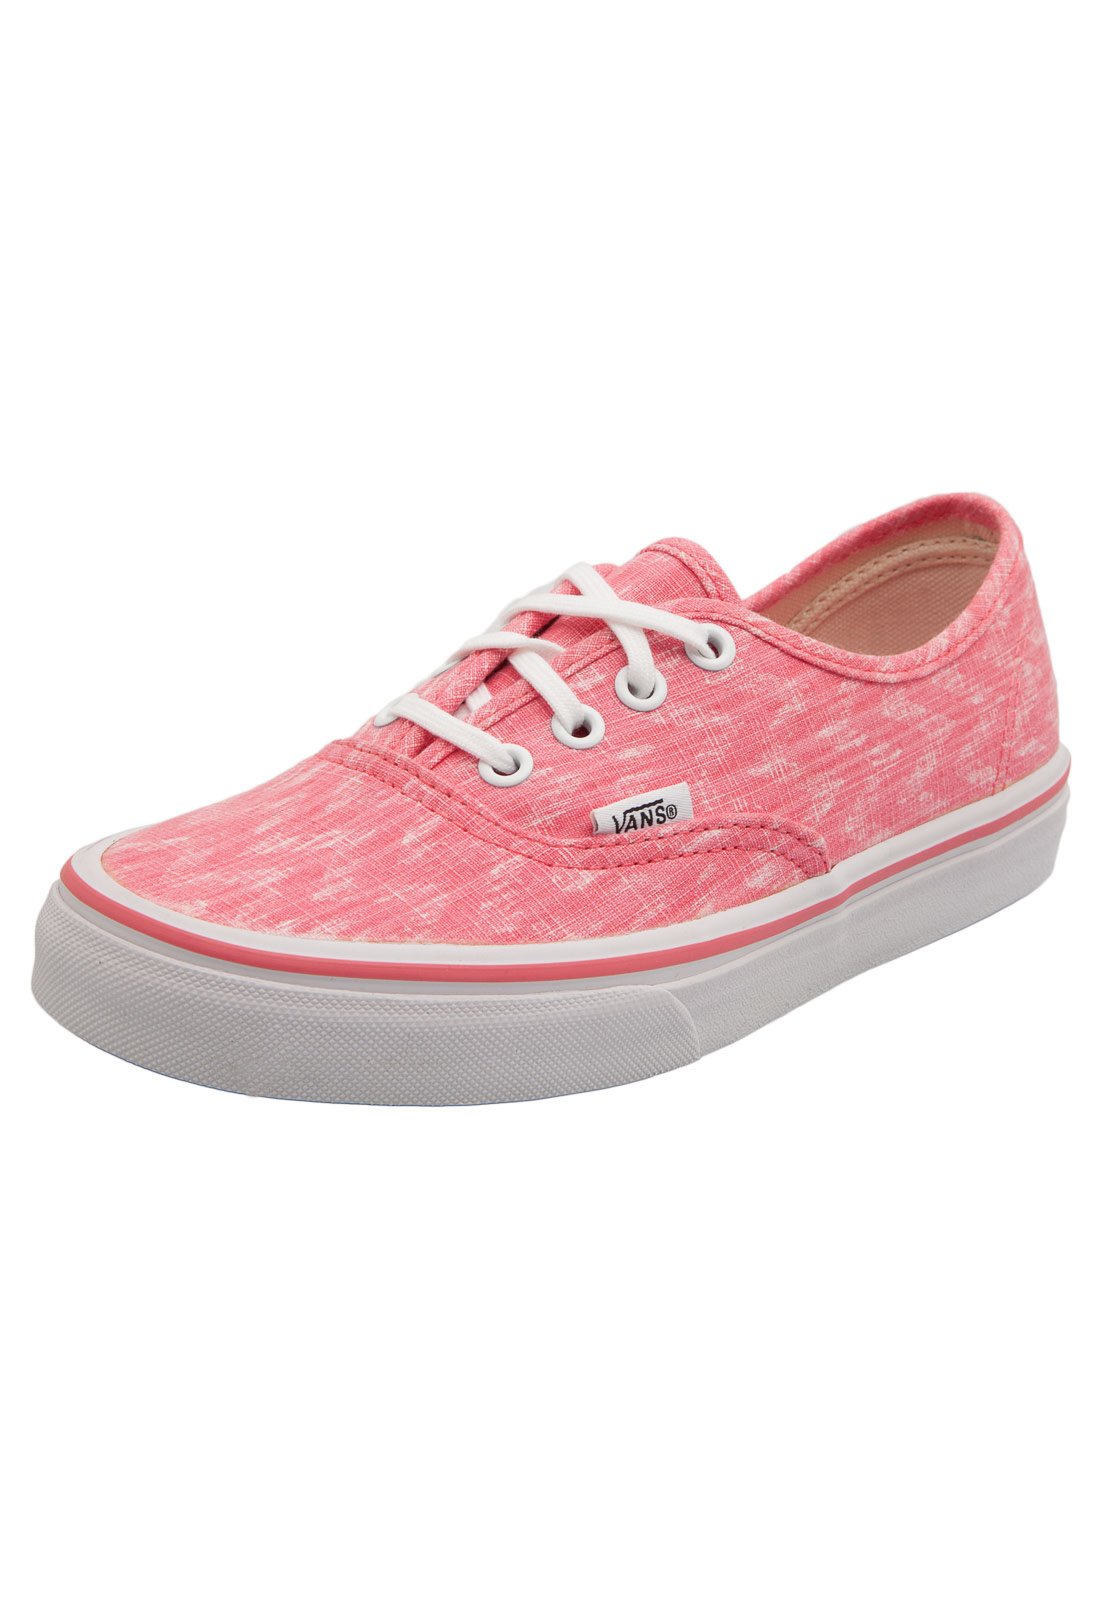 vans authentic kanui